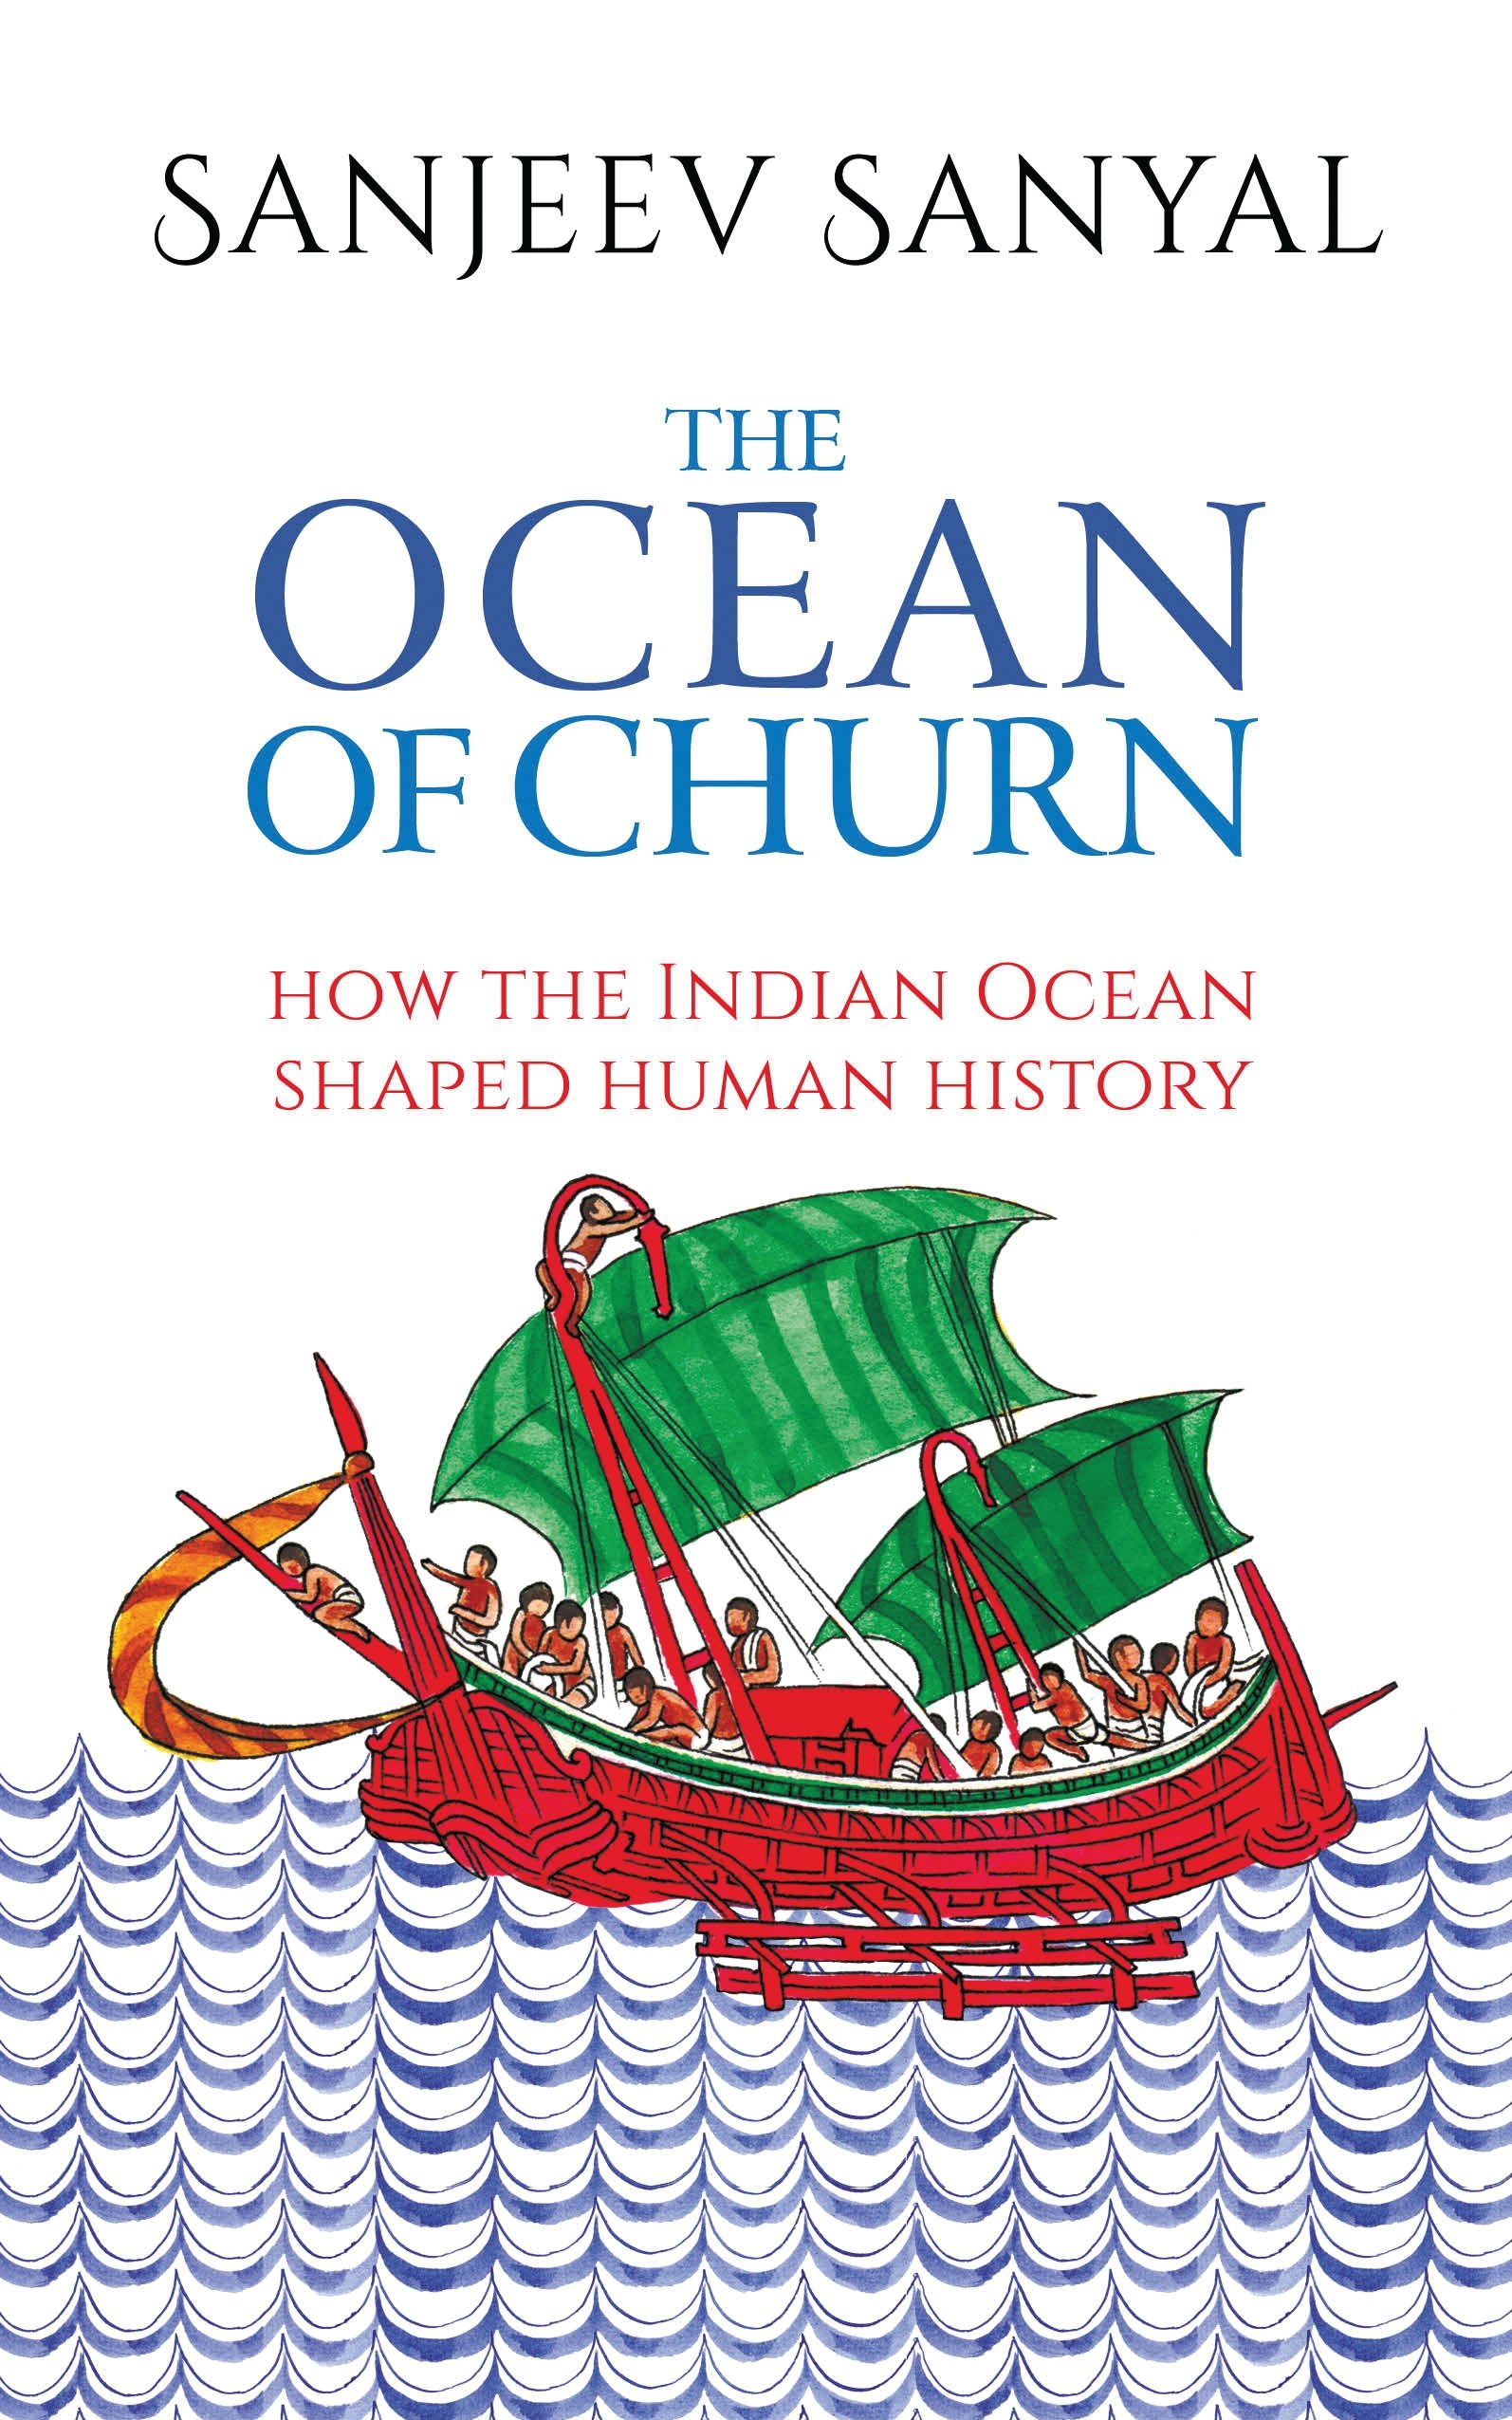 Ocean of Churn: How the Indian Ocean Shaped Human History